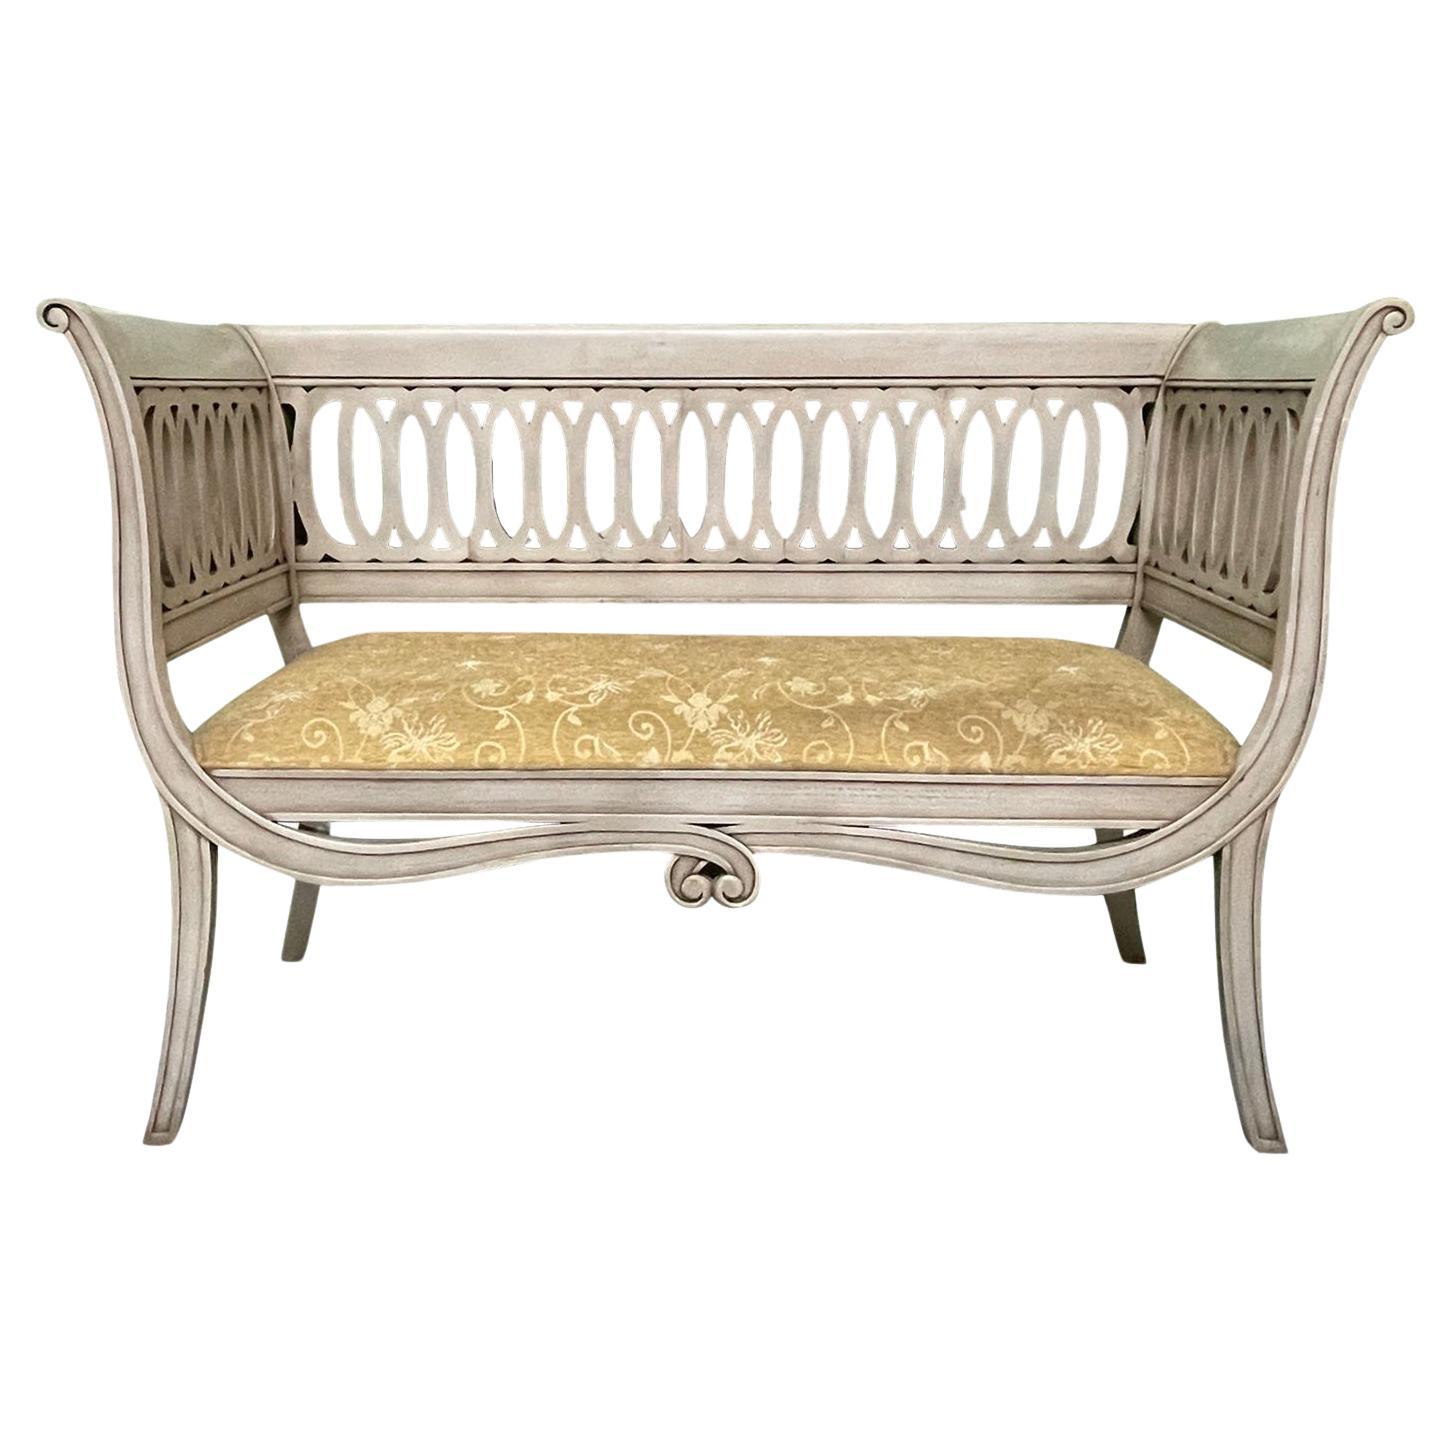 Scroll Form Bench in the Style of Dorothy Draper For Sale